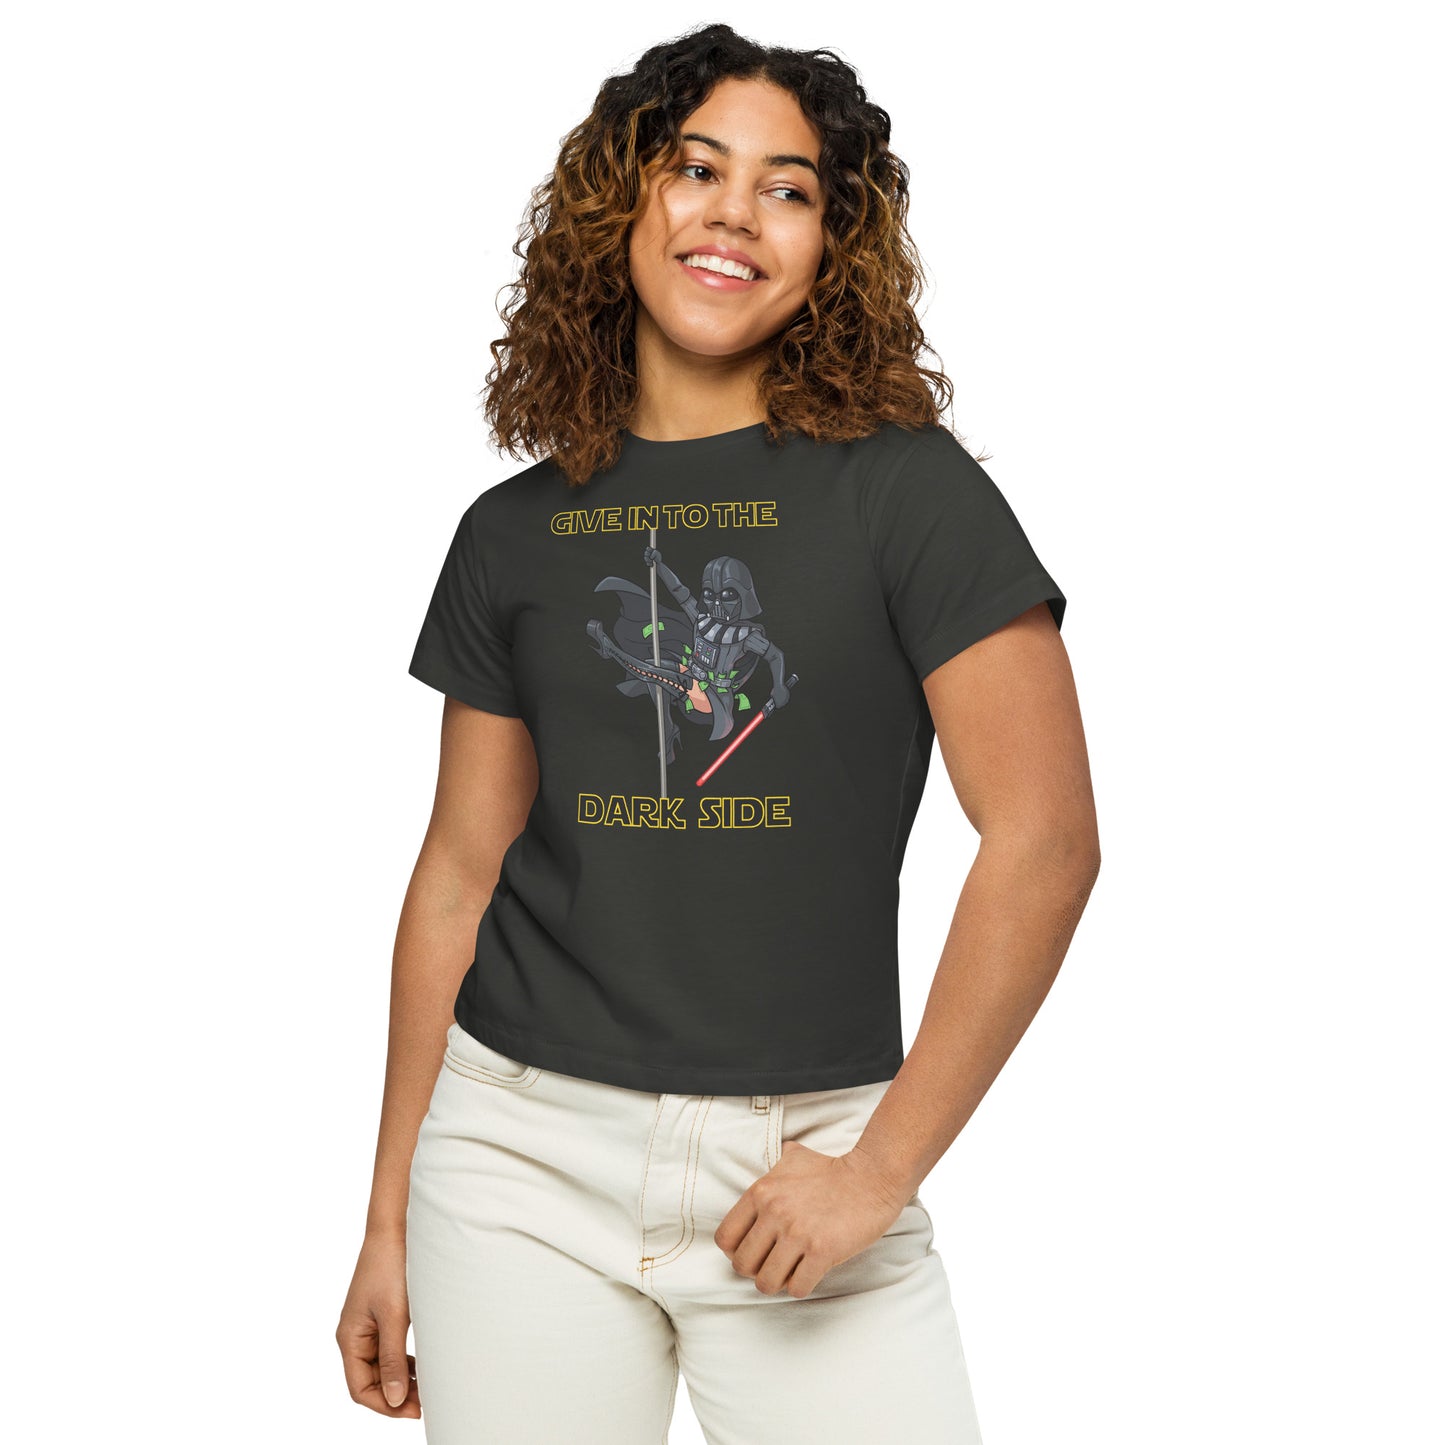 Give In To The Dark Side - Women’s high-waisted t-shirt